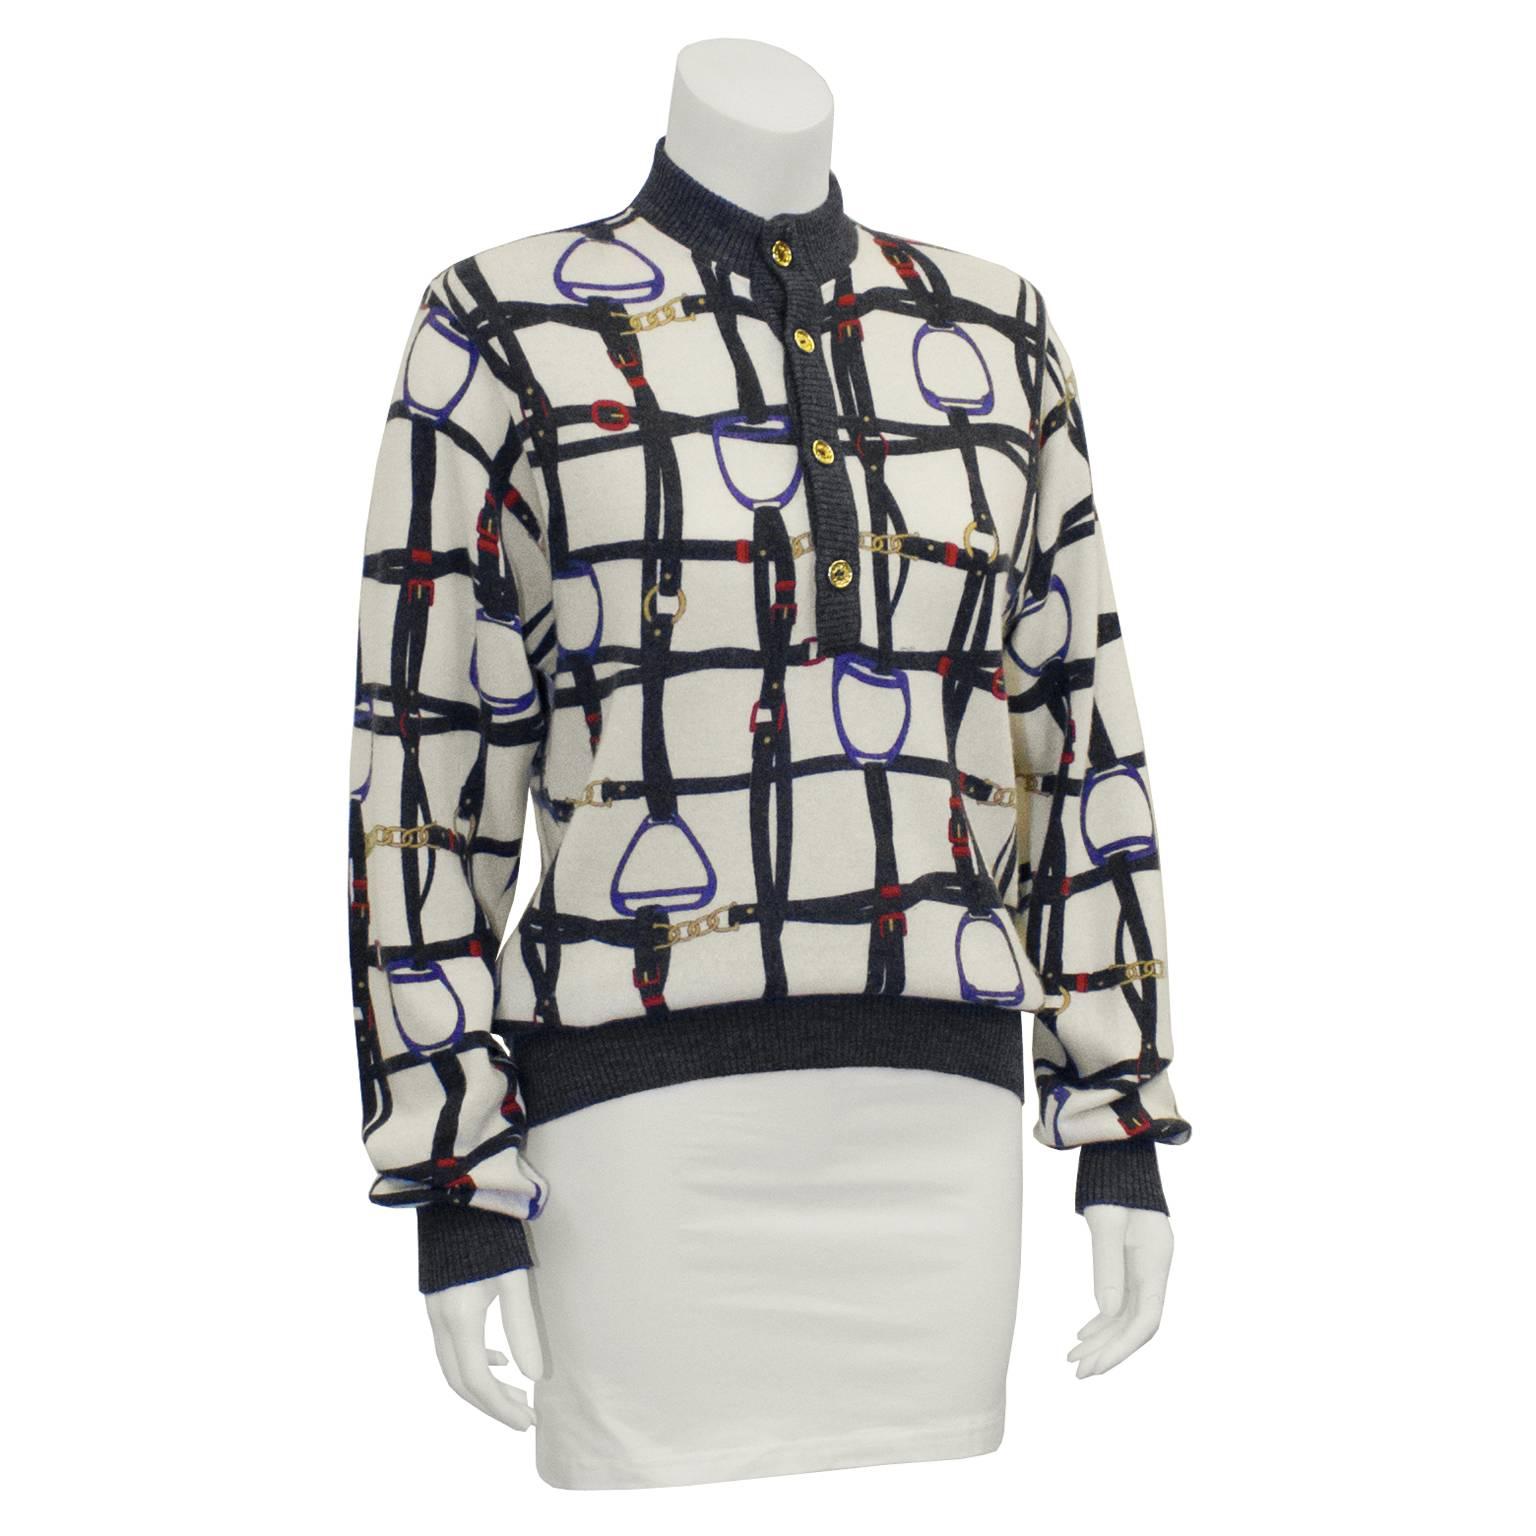 Adorable Celine cashmere sweater with equestrian print from the 1970's. Sweater has charcoal ribbed trim, and the print is a cream background with notes of charcoal, red, blue and gold. Band collar neck fastens at the front with a button. Buttons